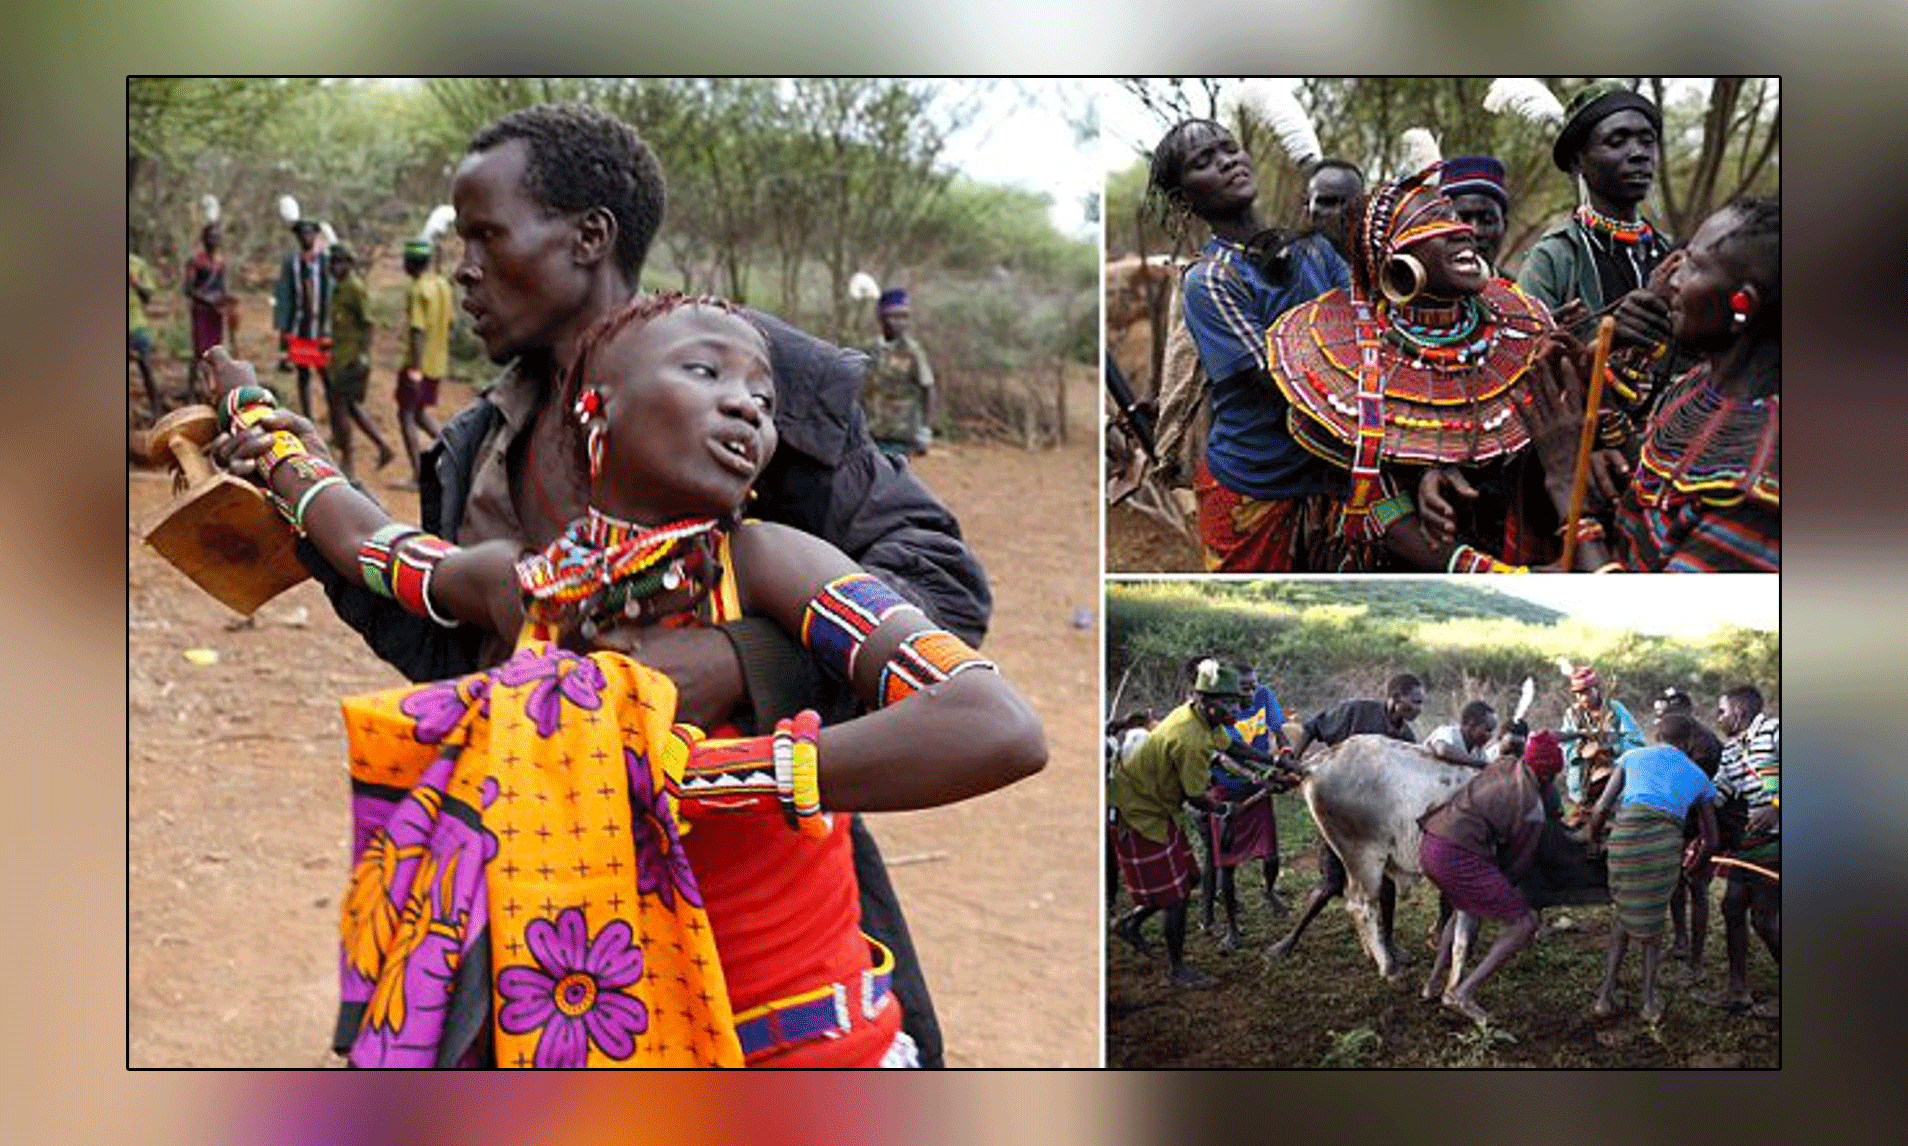 Africa: Strange ritual of beating the groom with a stick